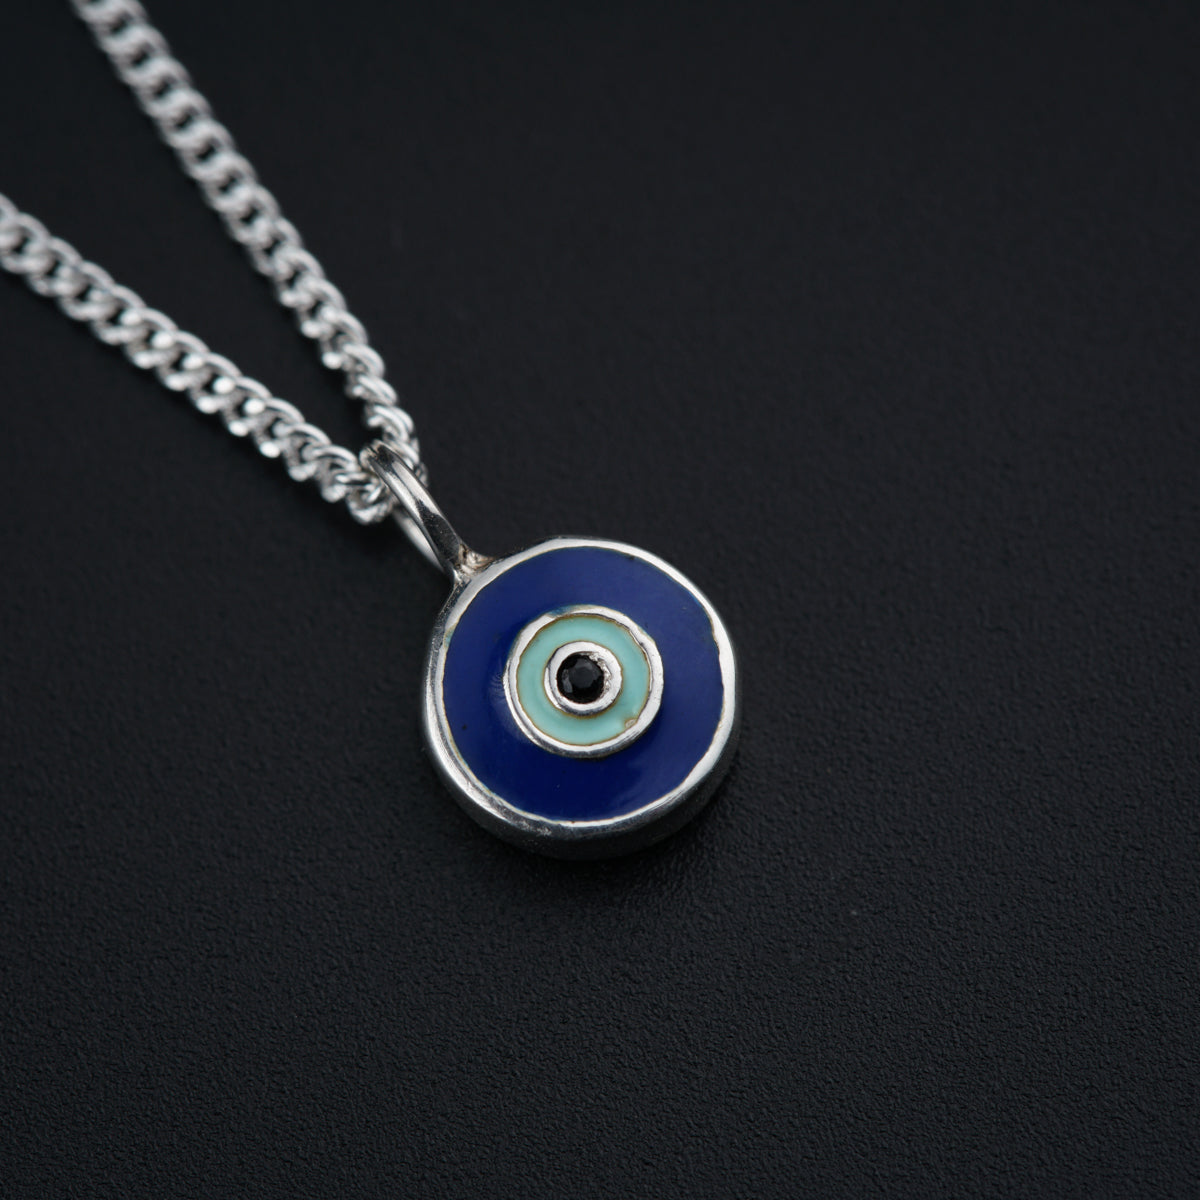 a necklace with a blue evil eye on it